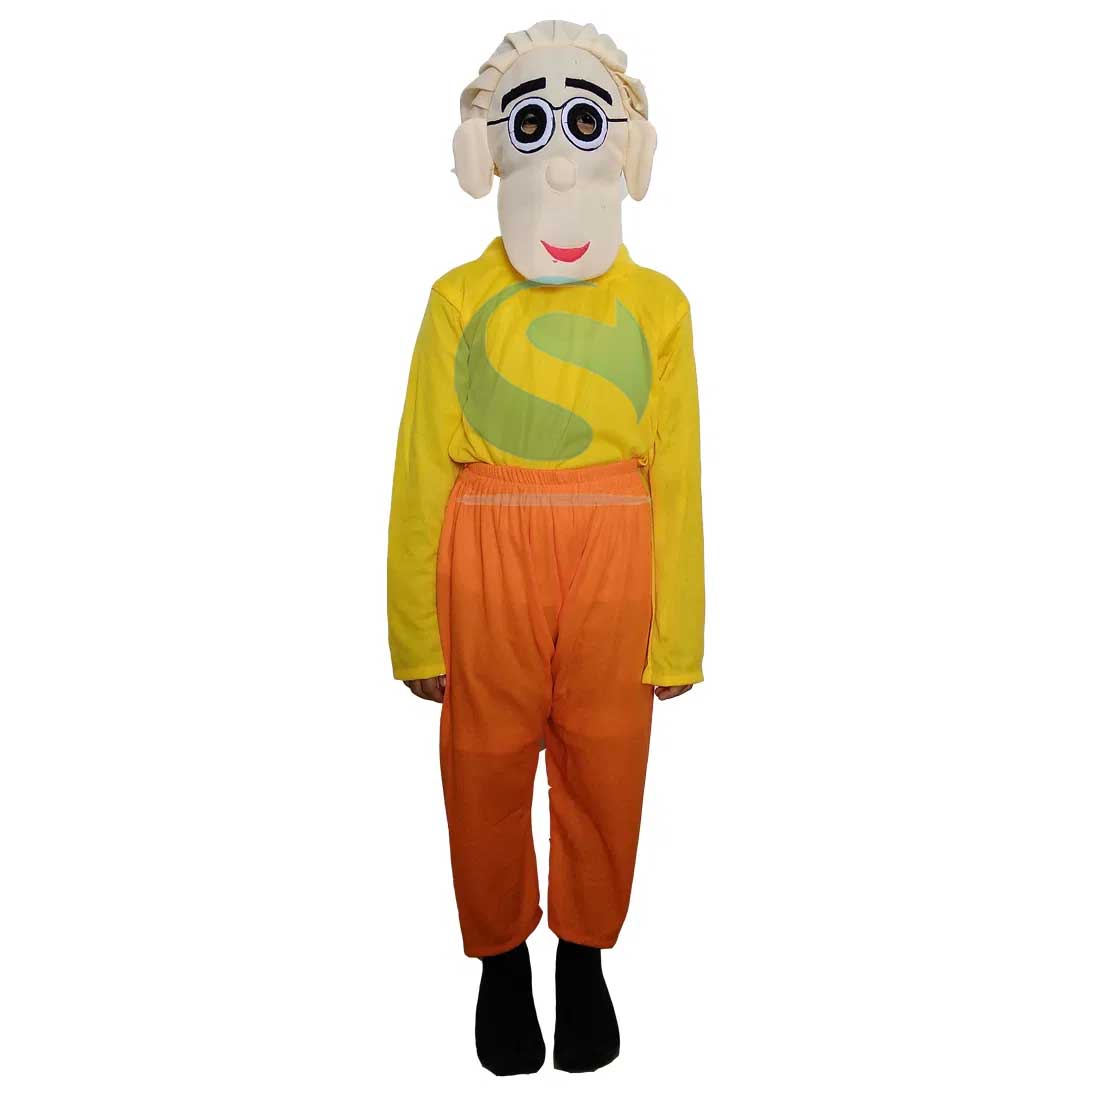 Patlu cartoon Character Dress for Kids – 5486 – Fancy Dress Store in Gaur  City, School Function Costumes at best prices/ Rental